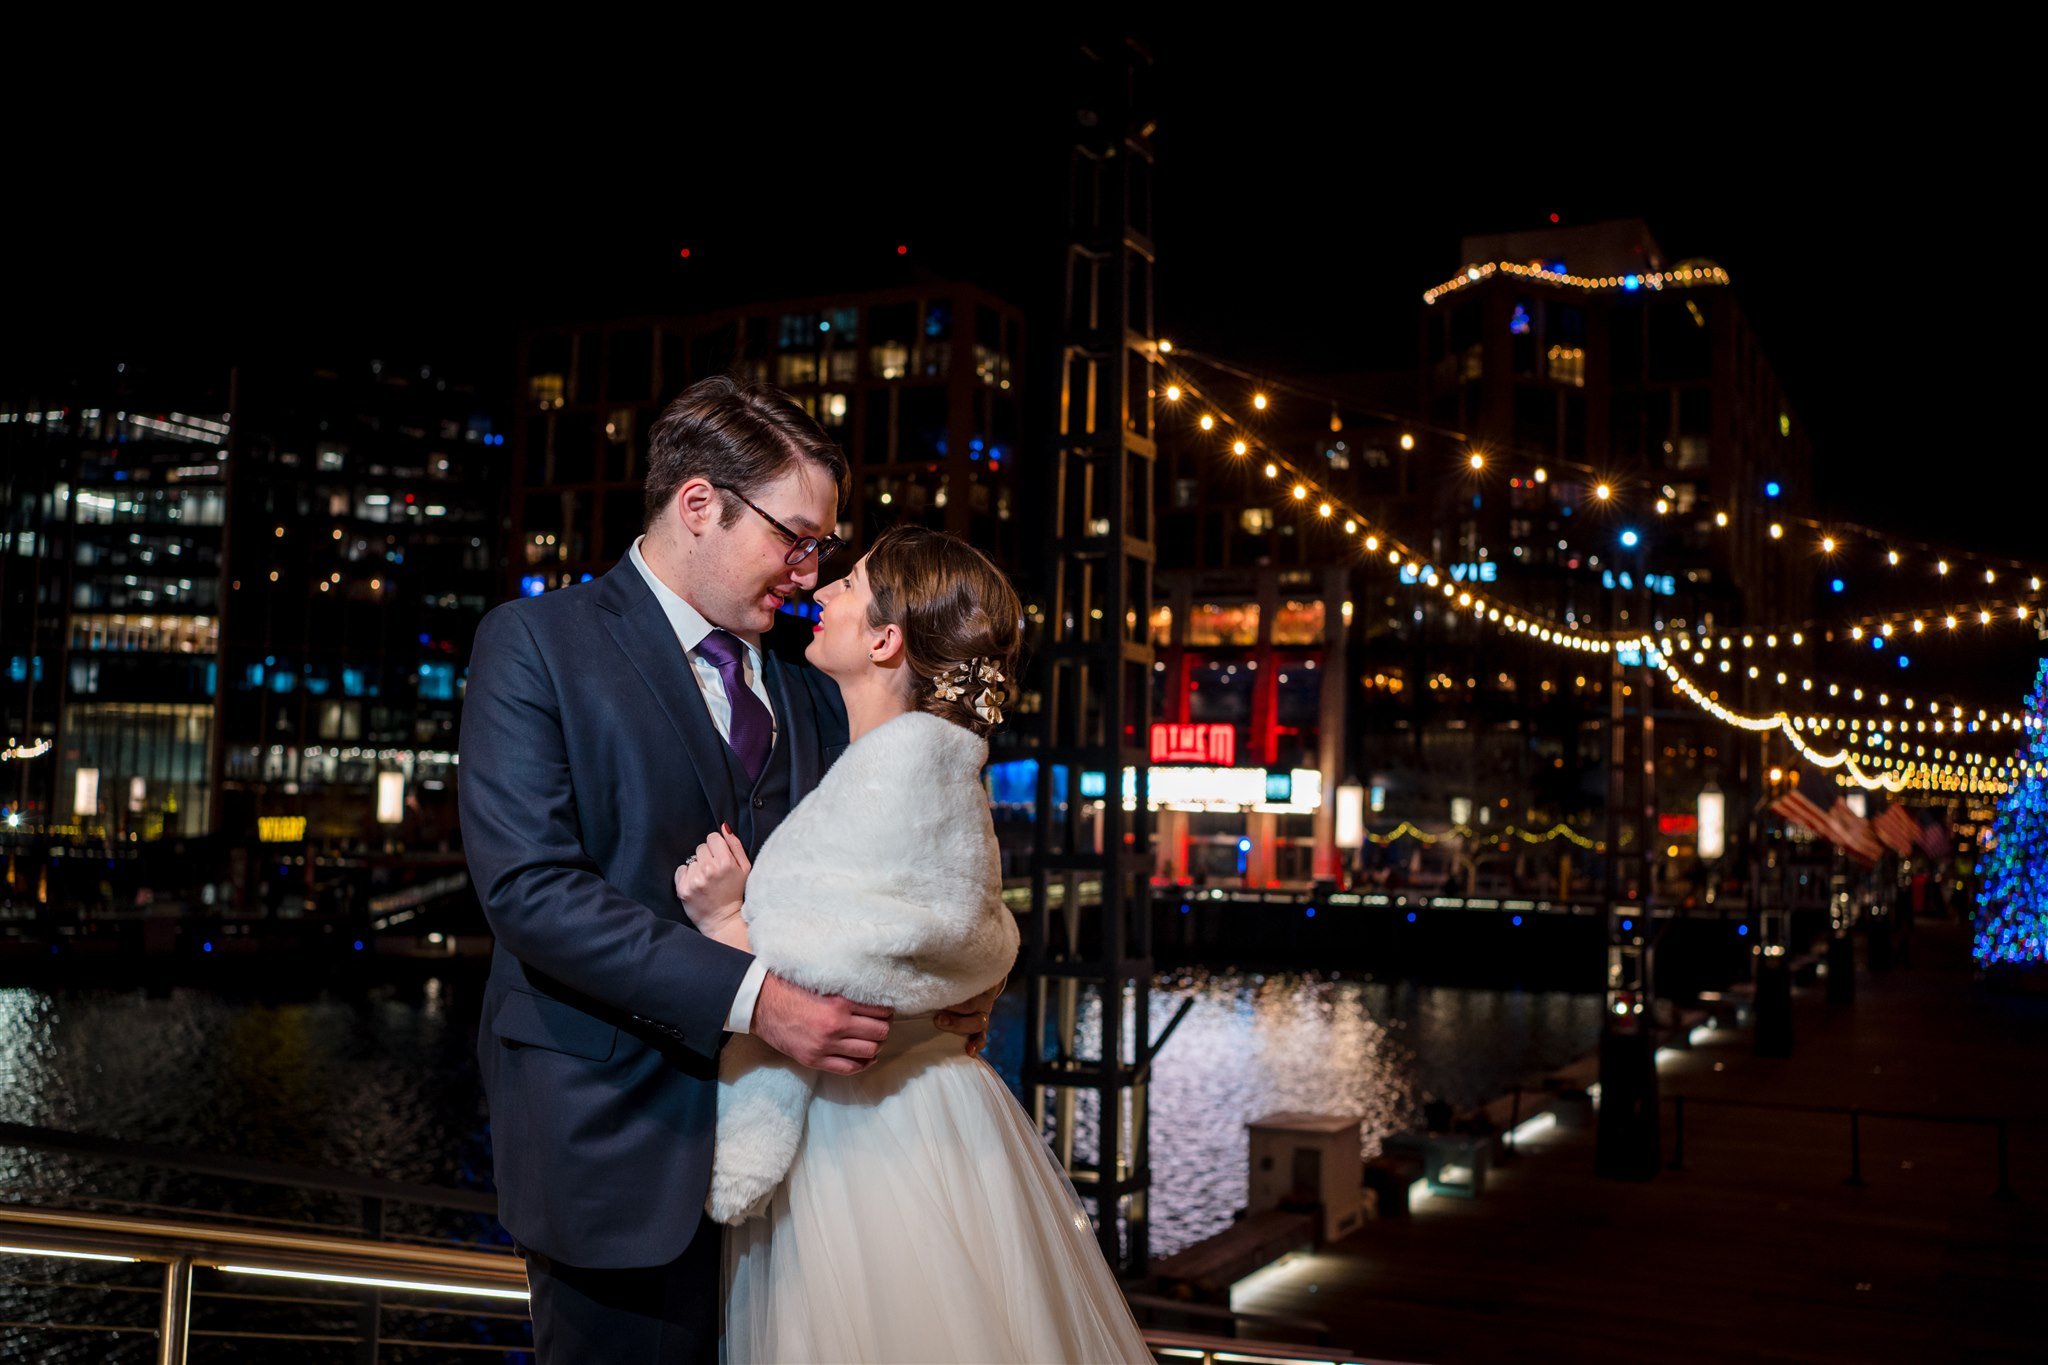 G238-Wedding-Reception-Wharf-Dockmaster-Building-DC-Photography-by-Bee-Two-Sweet.jpg